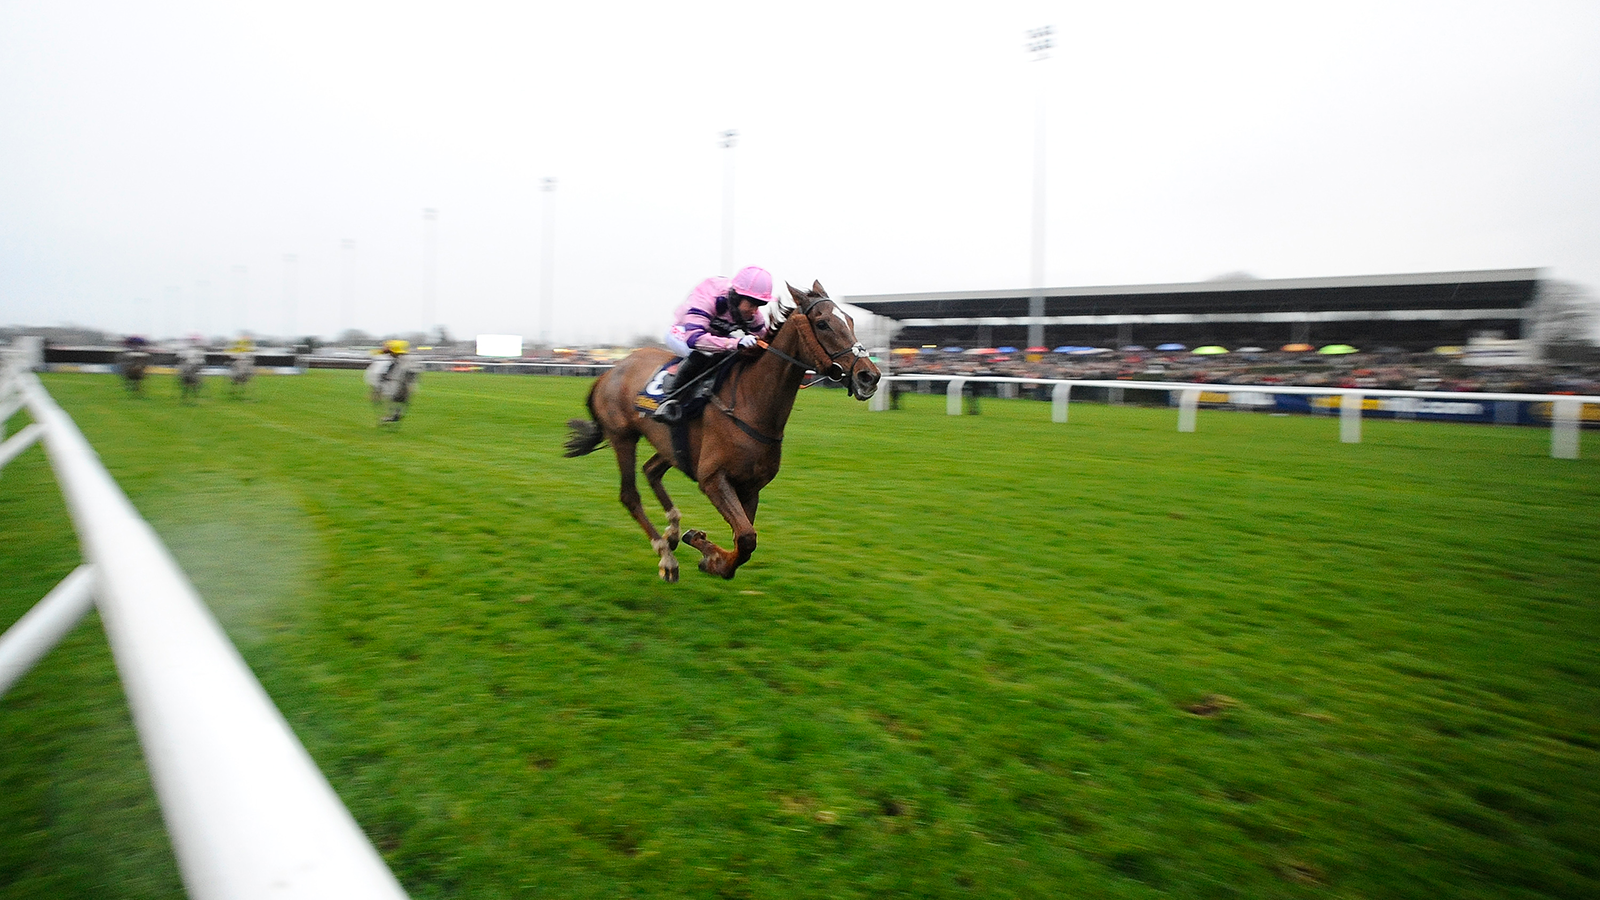 Saturday Racing Tips: Move Forward with the Plan